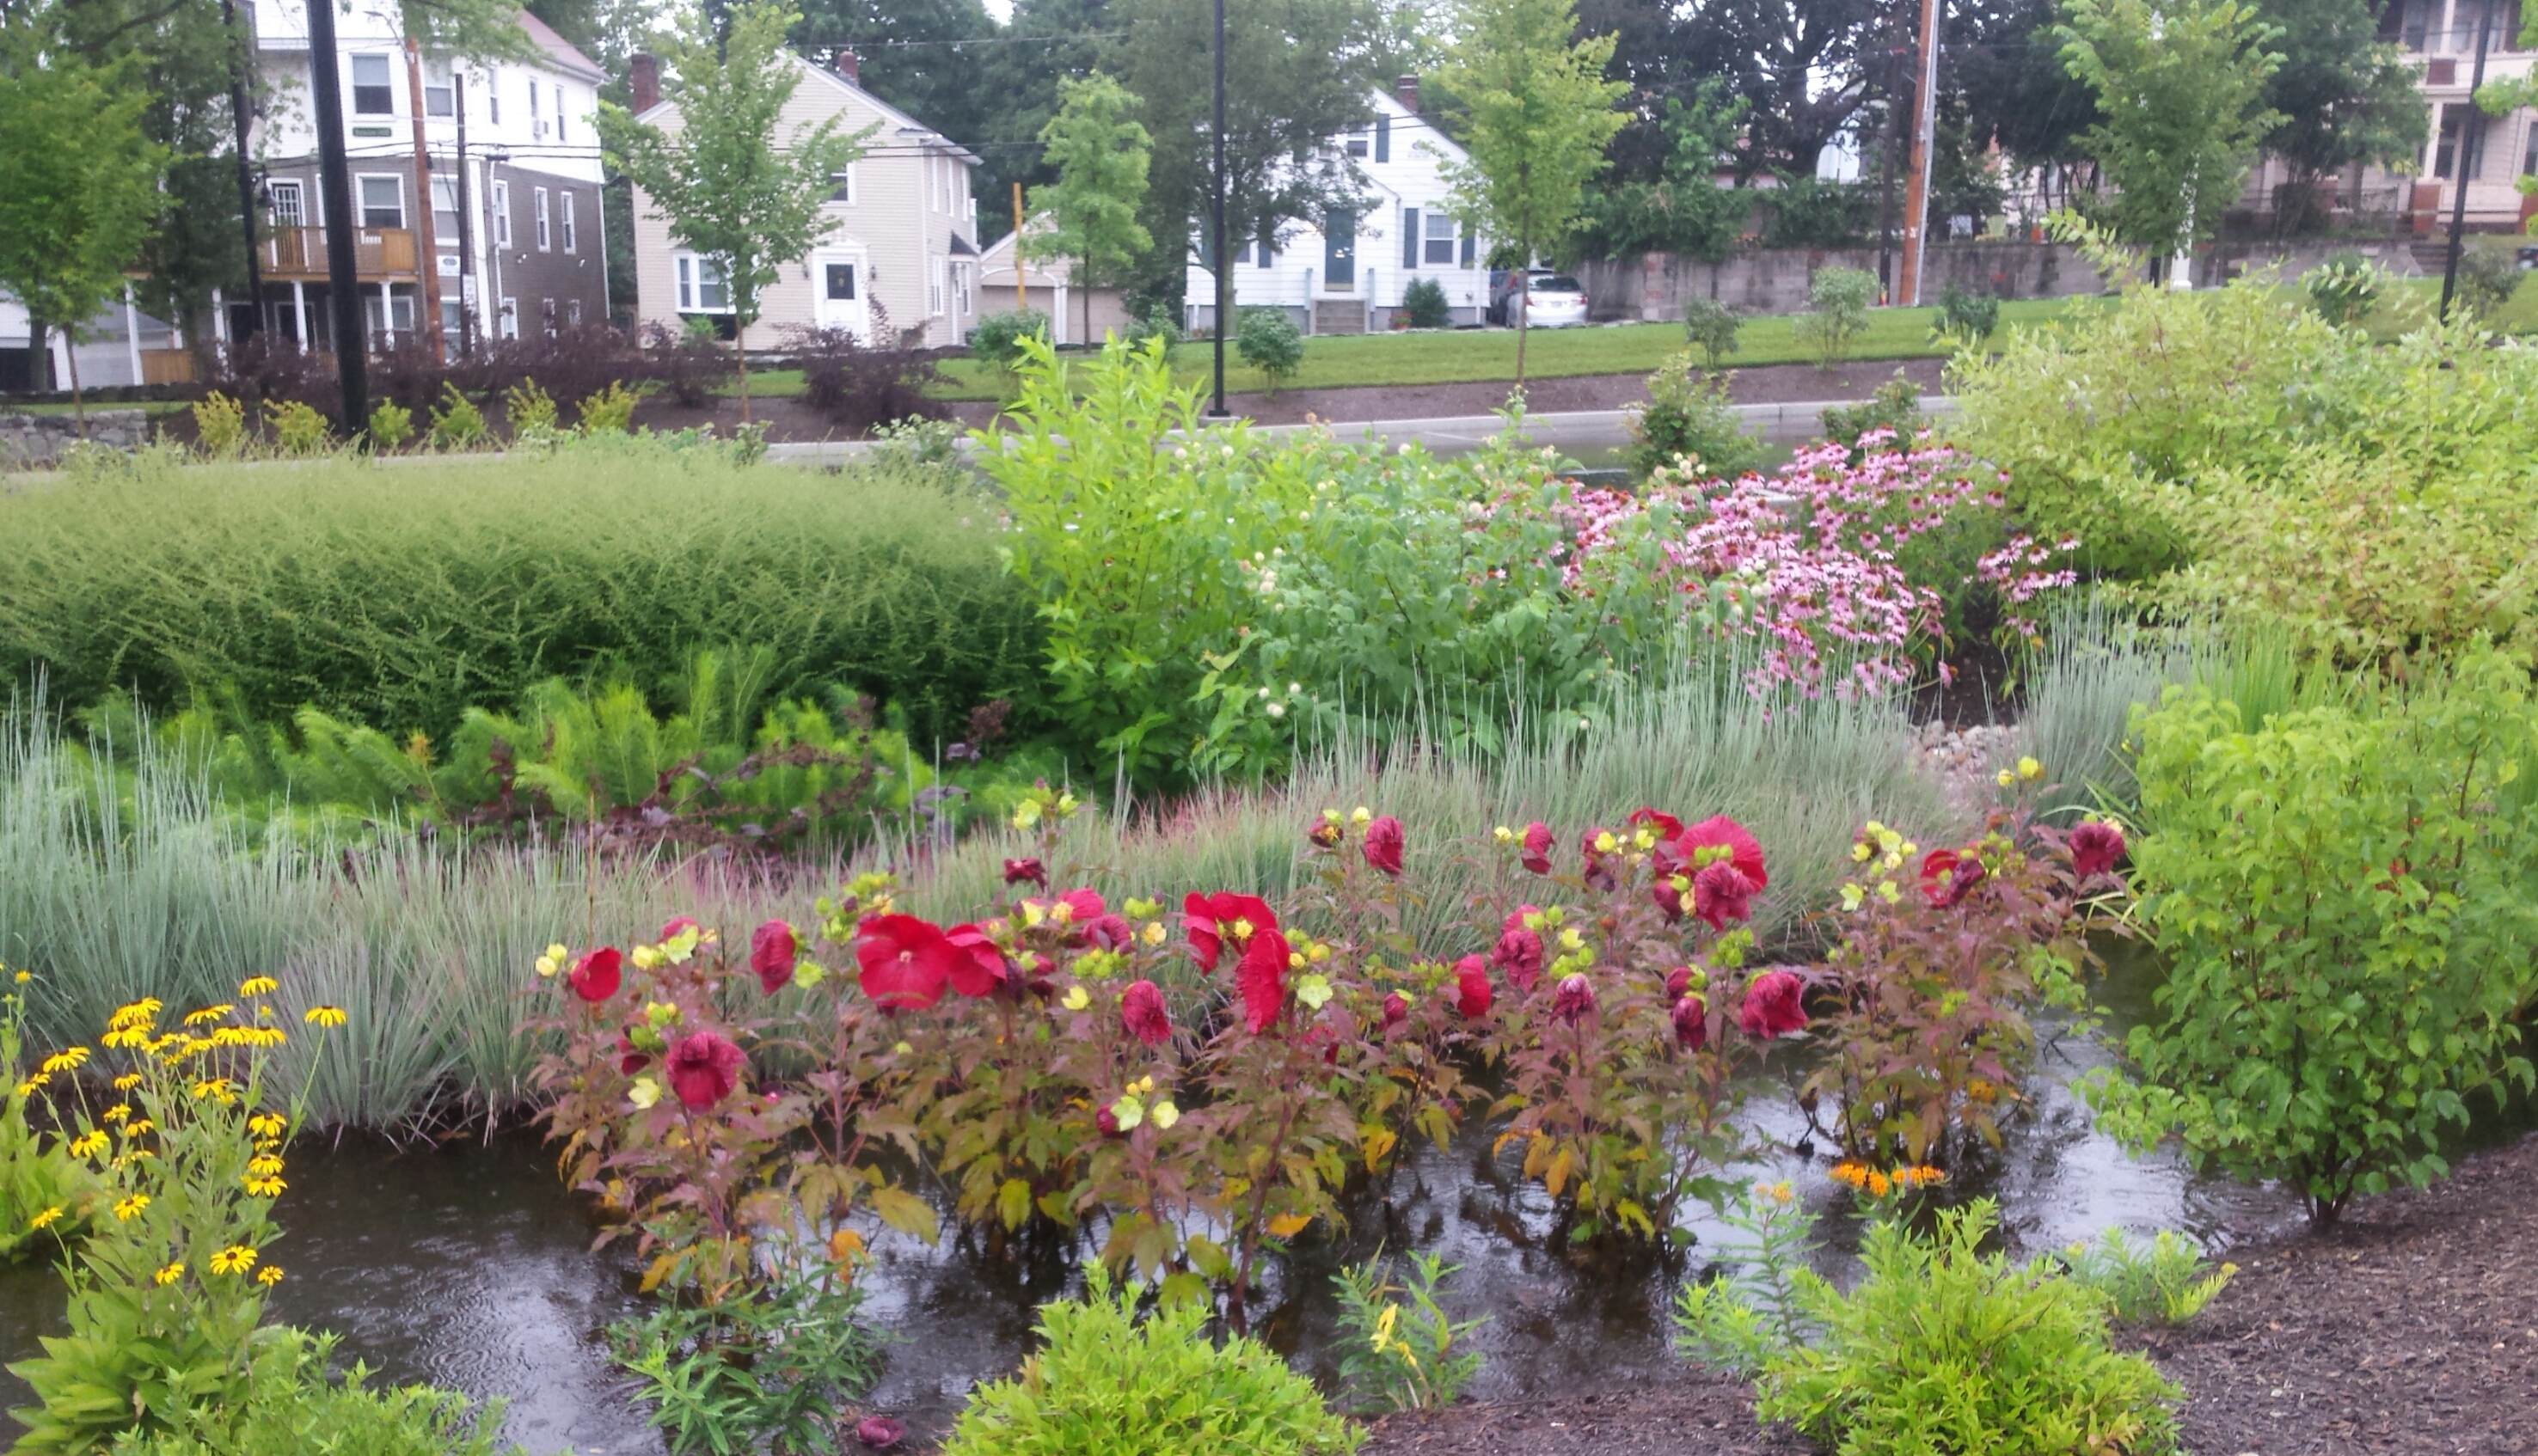 Bioswales lhelp control storm water bring beauty of nature to urban campus. Photo By Dave Everett